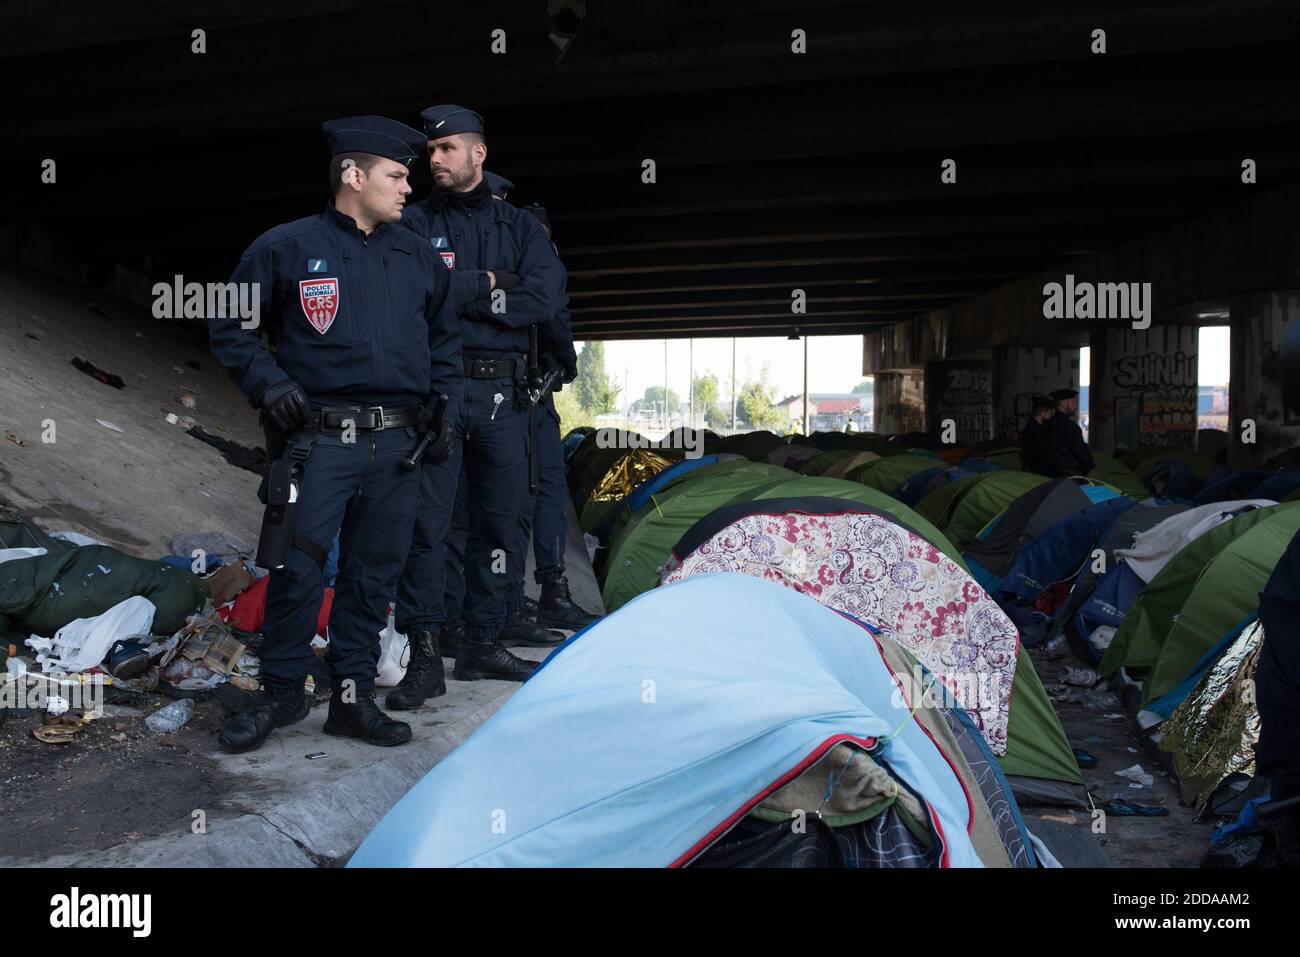 A police officer stands guard at the Millenaire migrants makeshift camp along the Canal de Saint-Denis near Porte de la Villette, northern Paris, France, following its evacuation on May 30, 2018. More than a thousand migrants and refugees were evacuated on early May 30, 2018 from a makeshift camp that had been set up for several weeks along the Canal. Photo by Samuel Boivin/ABACAPRESS.COM Stock Photo